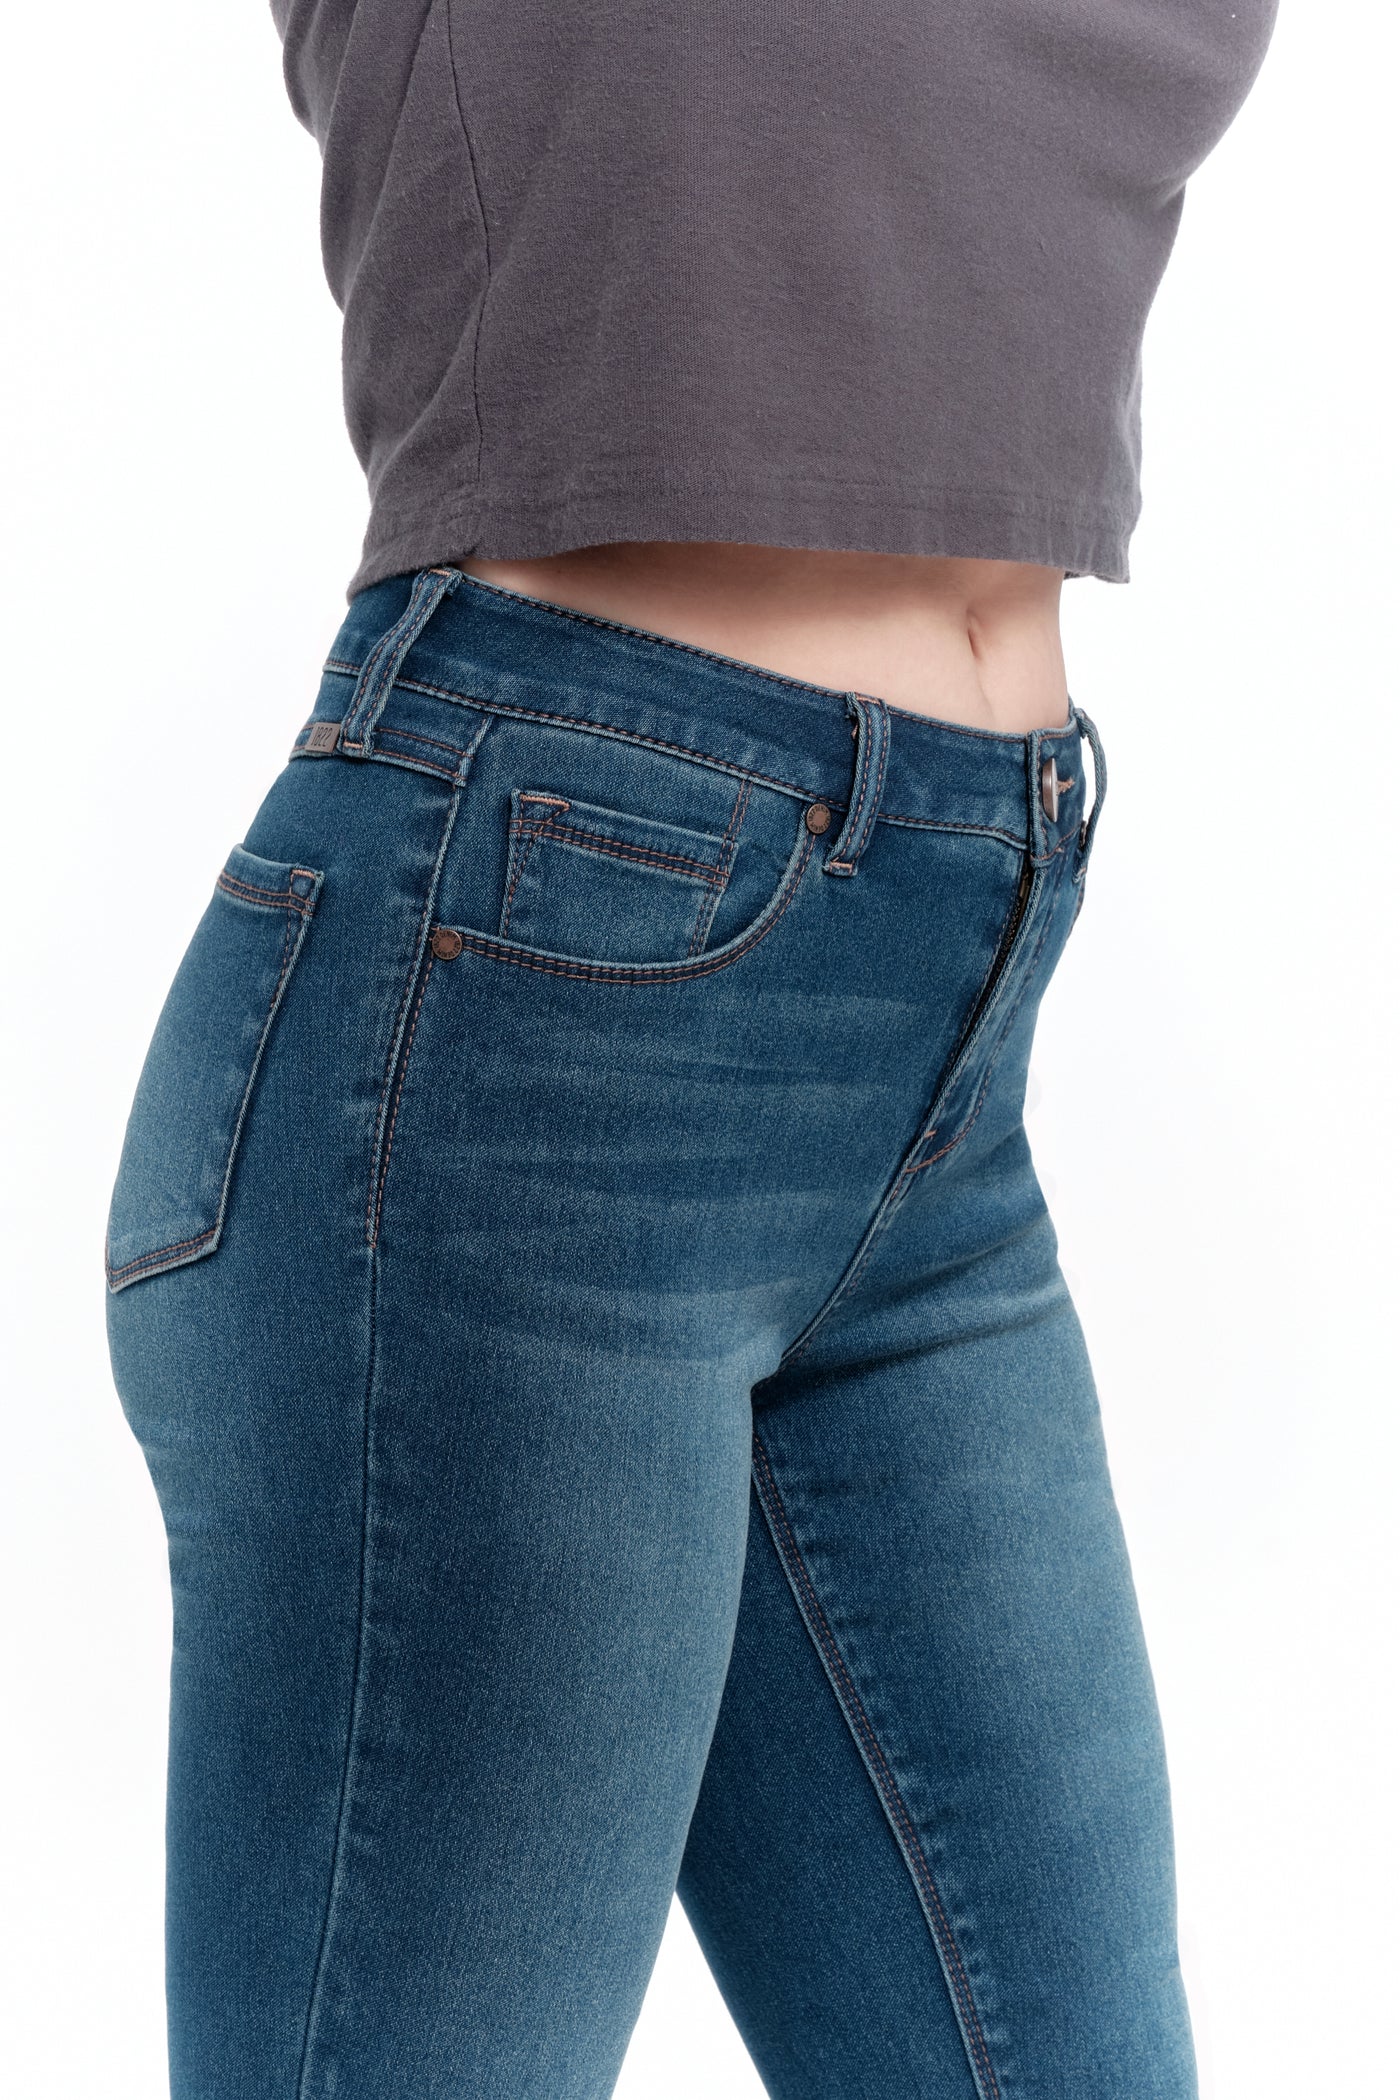 1822 Denim Butter Skinny Jeans Are Absurdly Soft and Stretchy